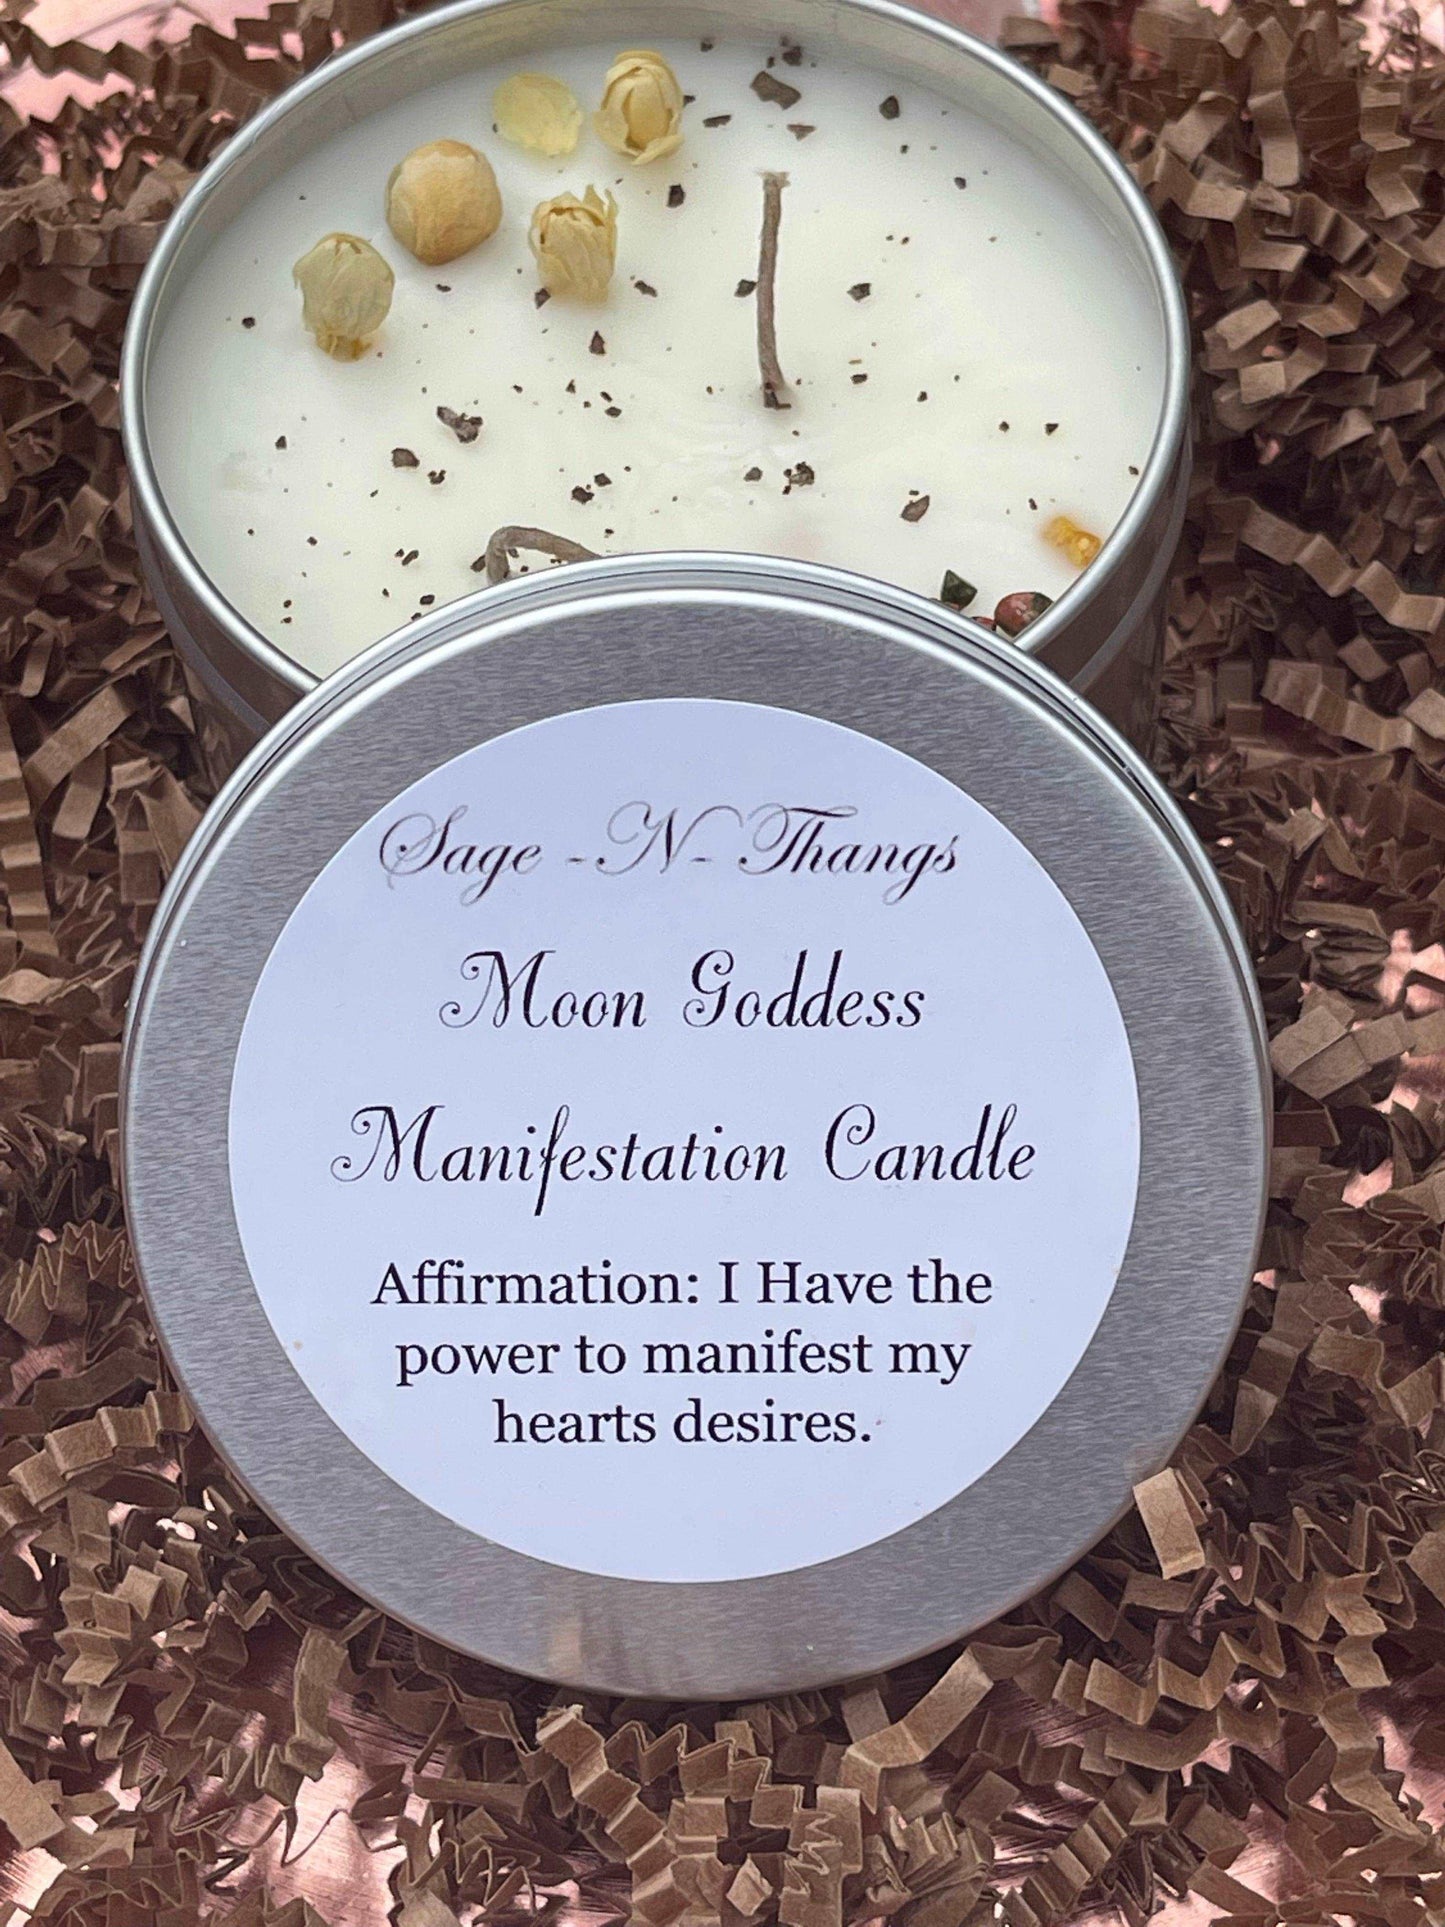 Moon Goddess Manifestation Candle by Sage N Thangs